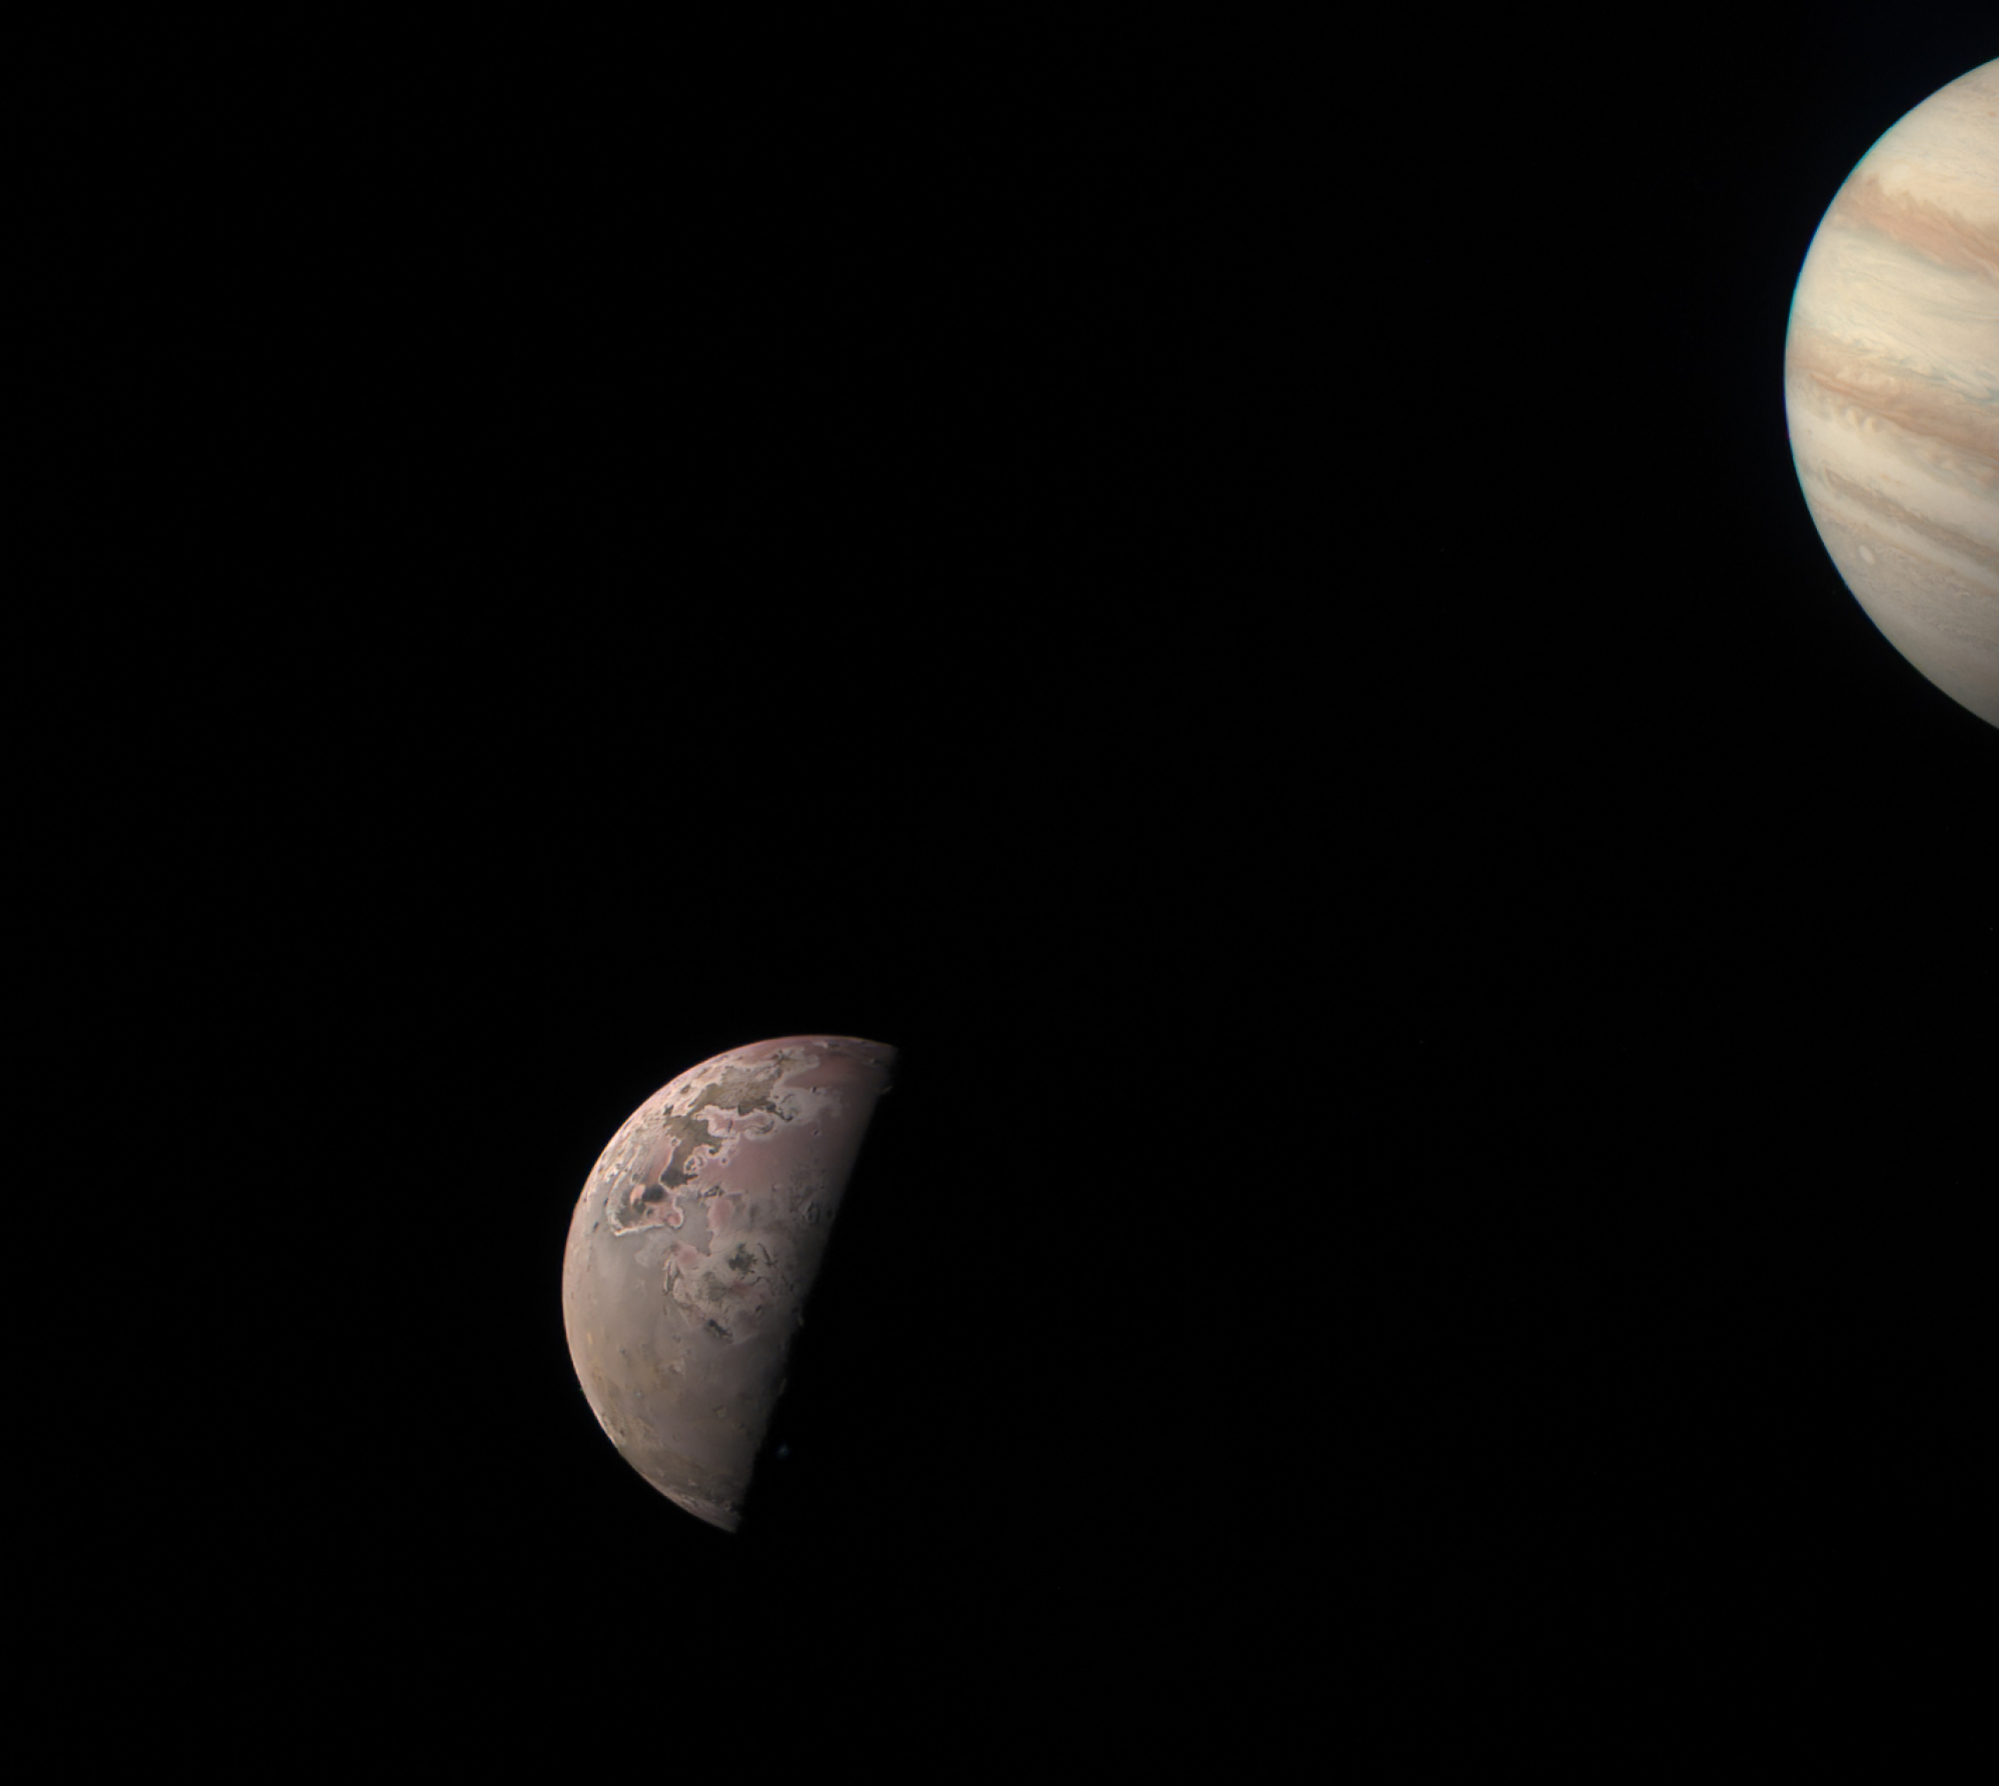 Io, on left, and a partial view of the gas giant Jupiter, on right.